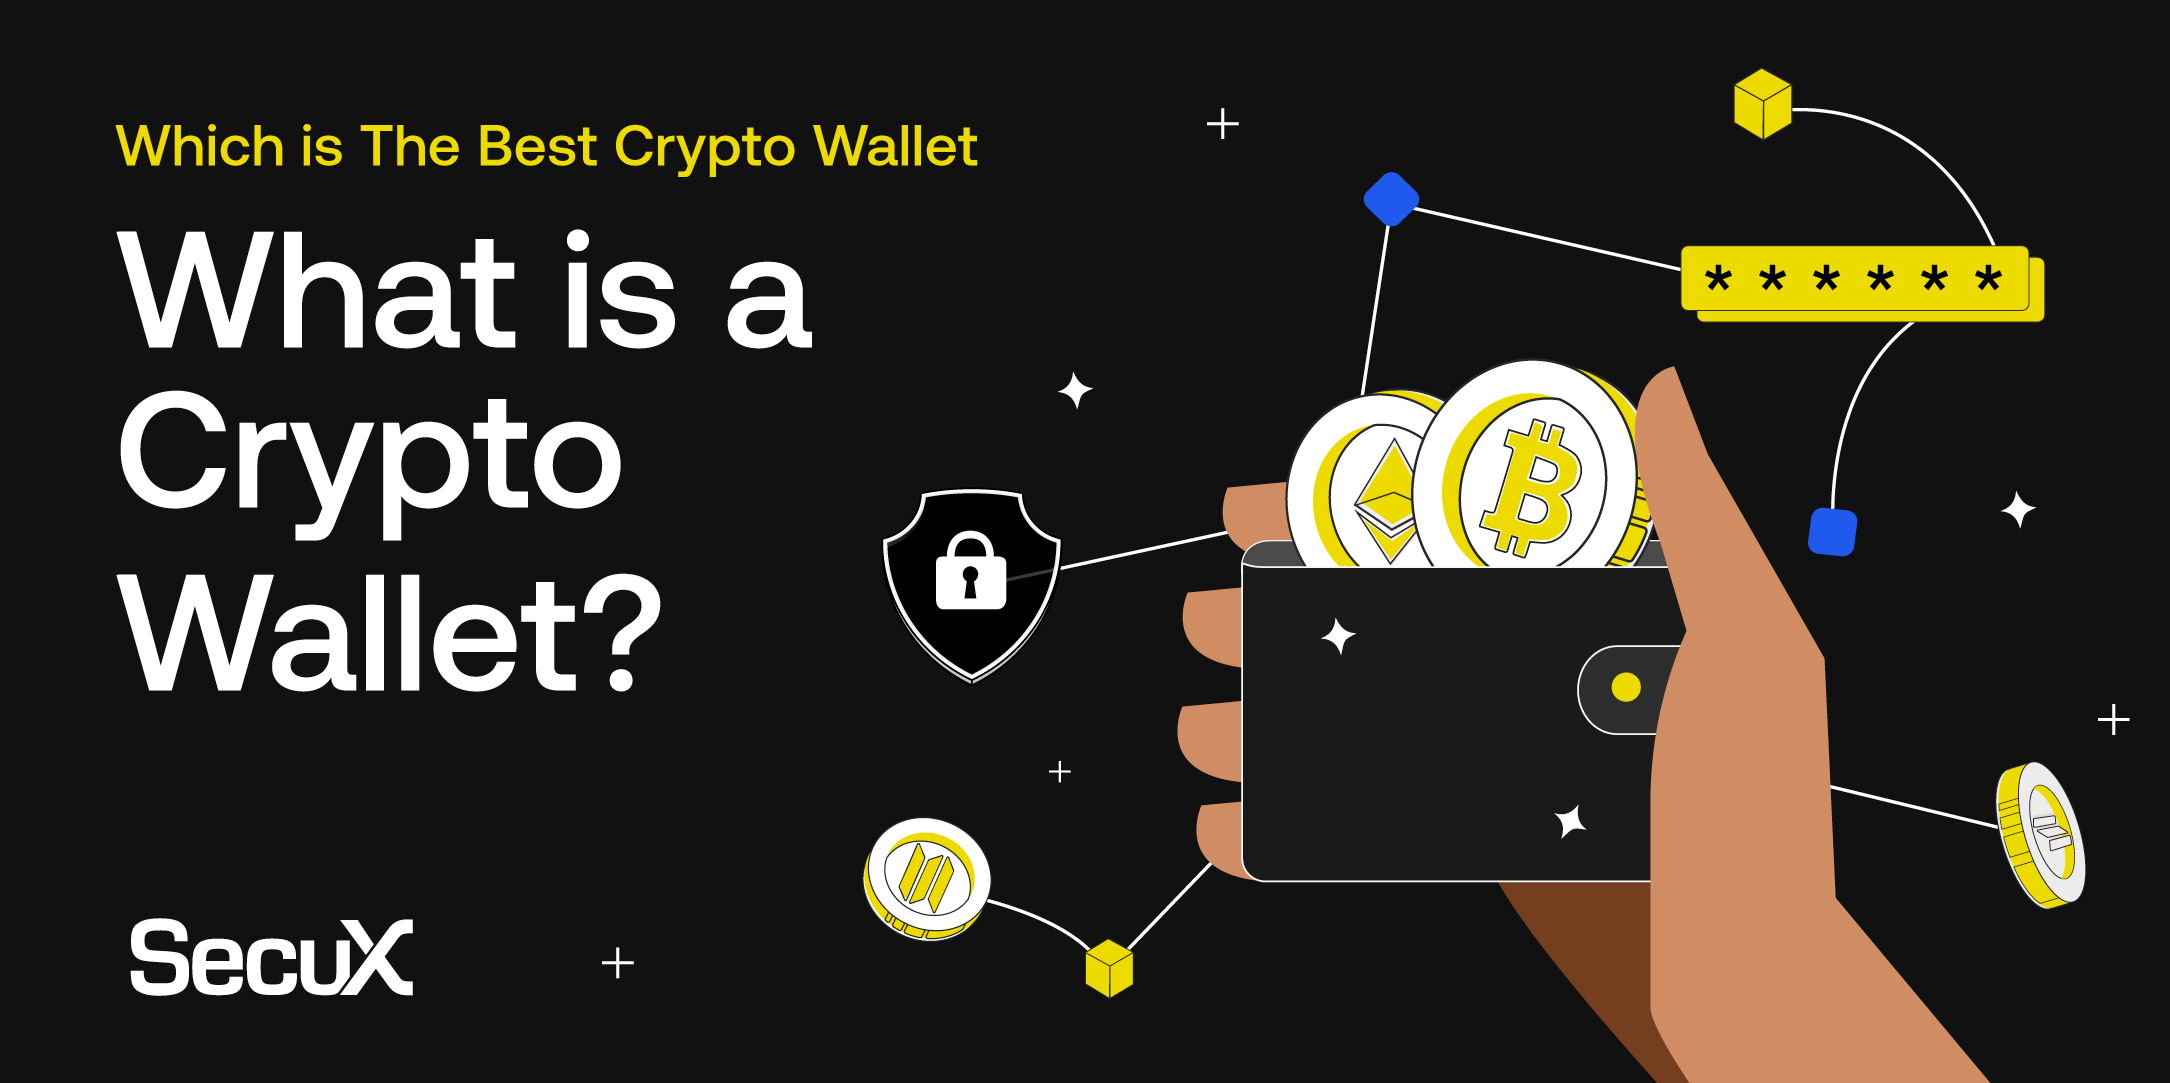 Whats a Crypto Wallet